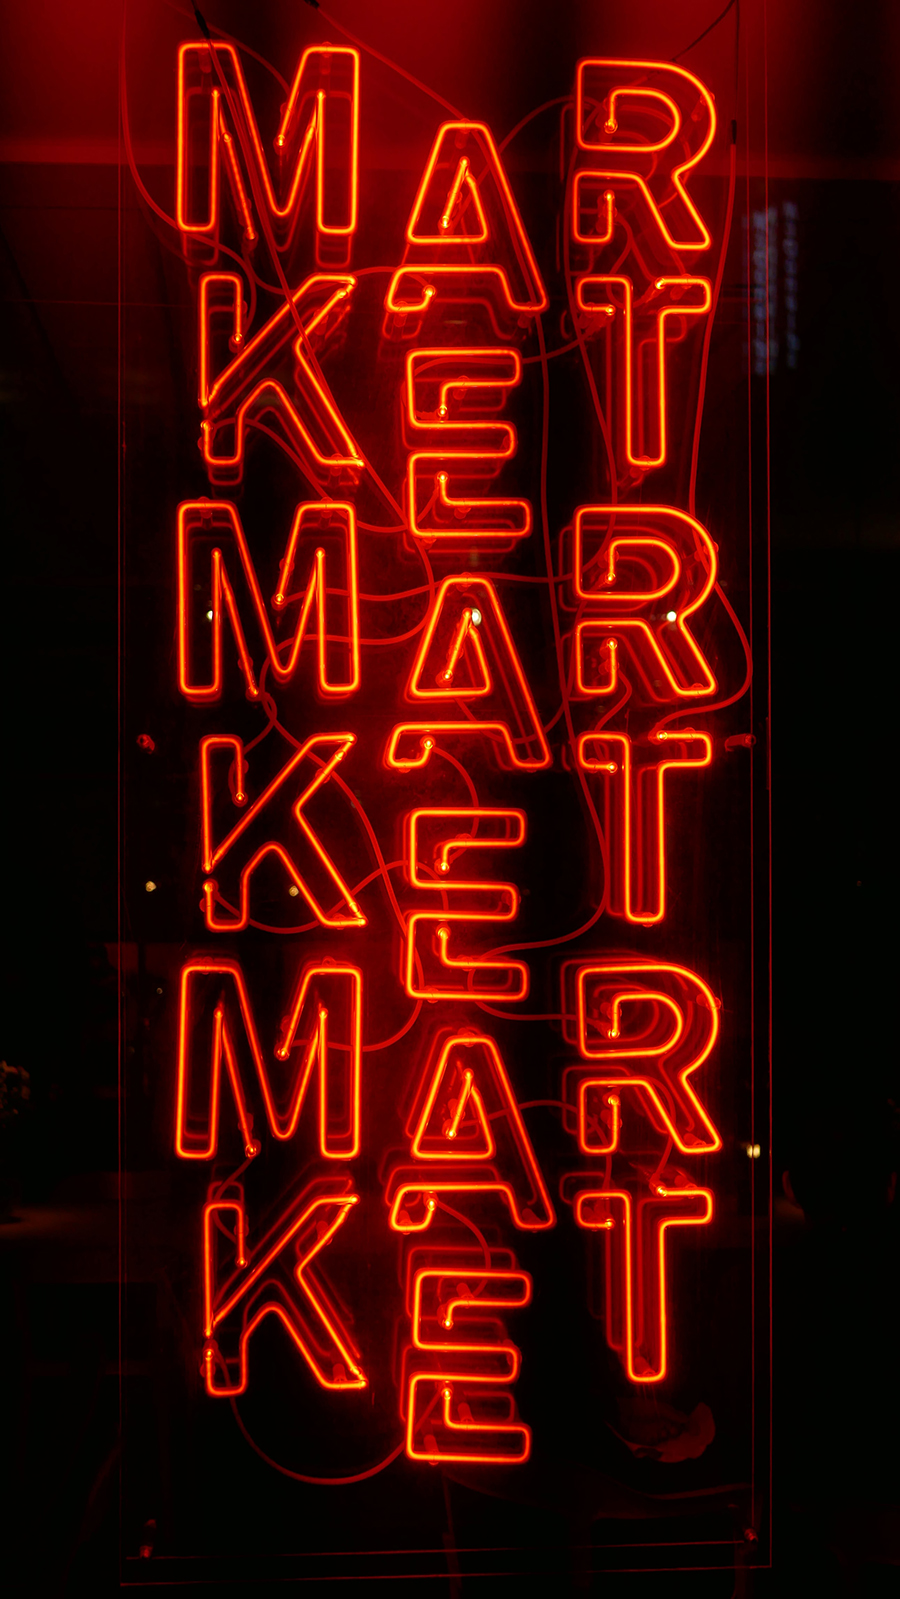 traditional marketing image of neon text on brick wall